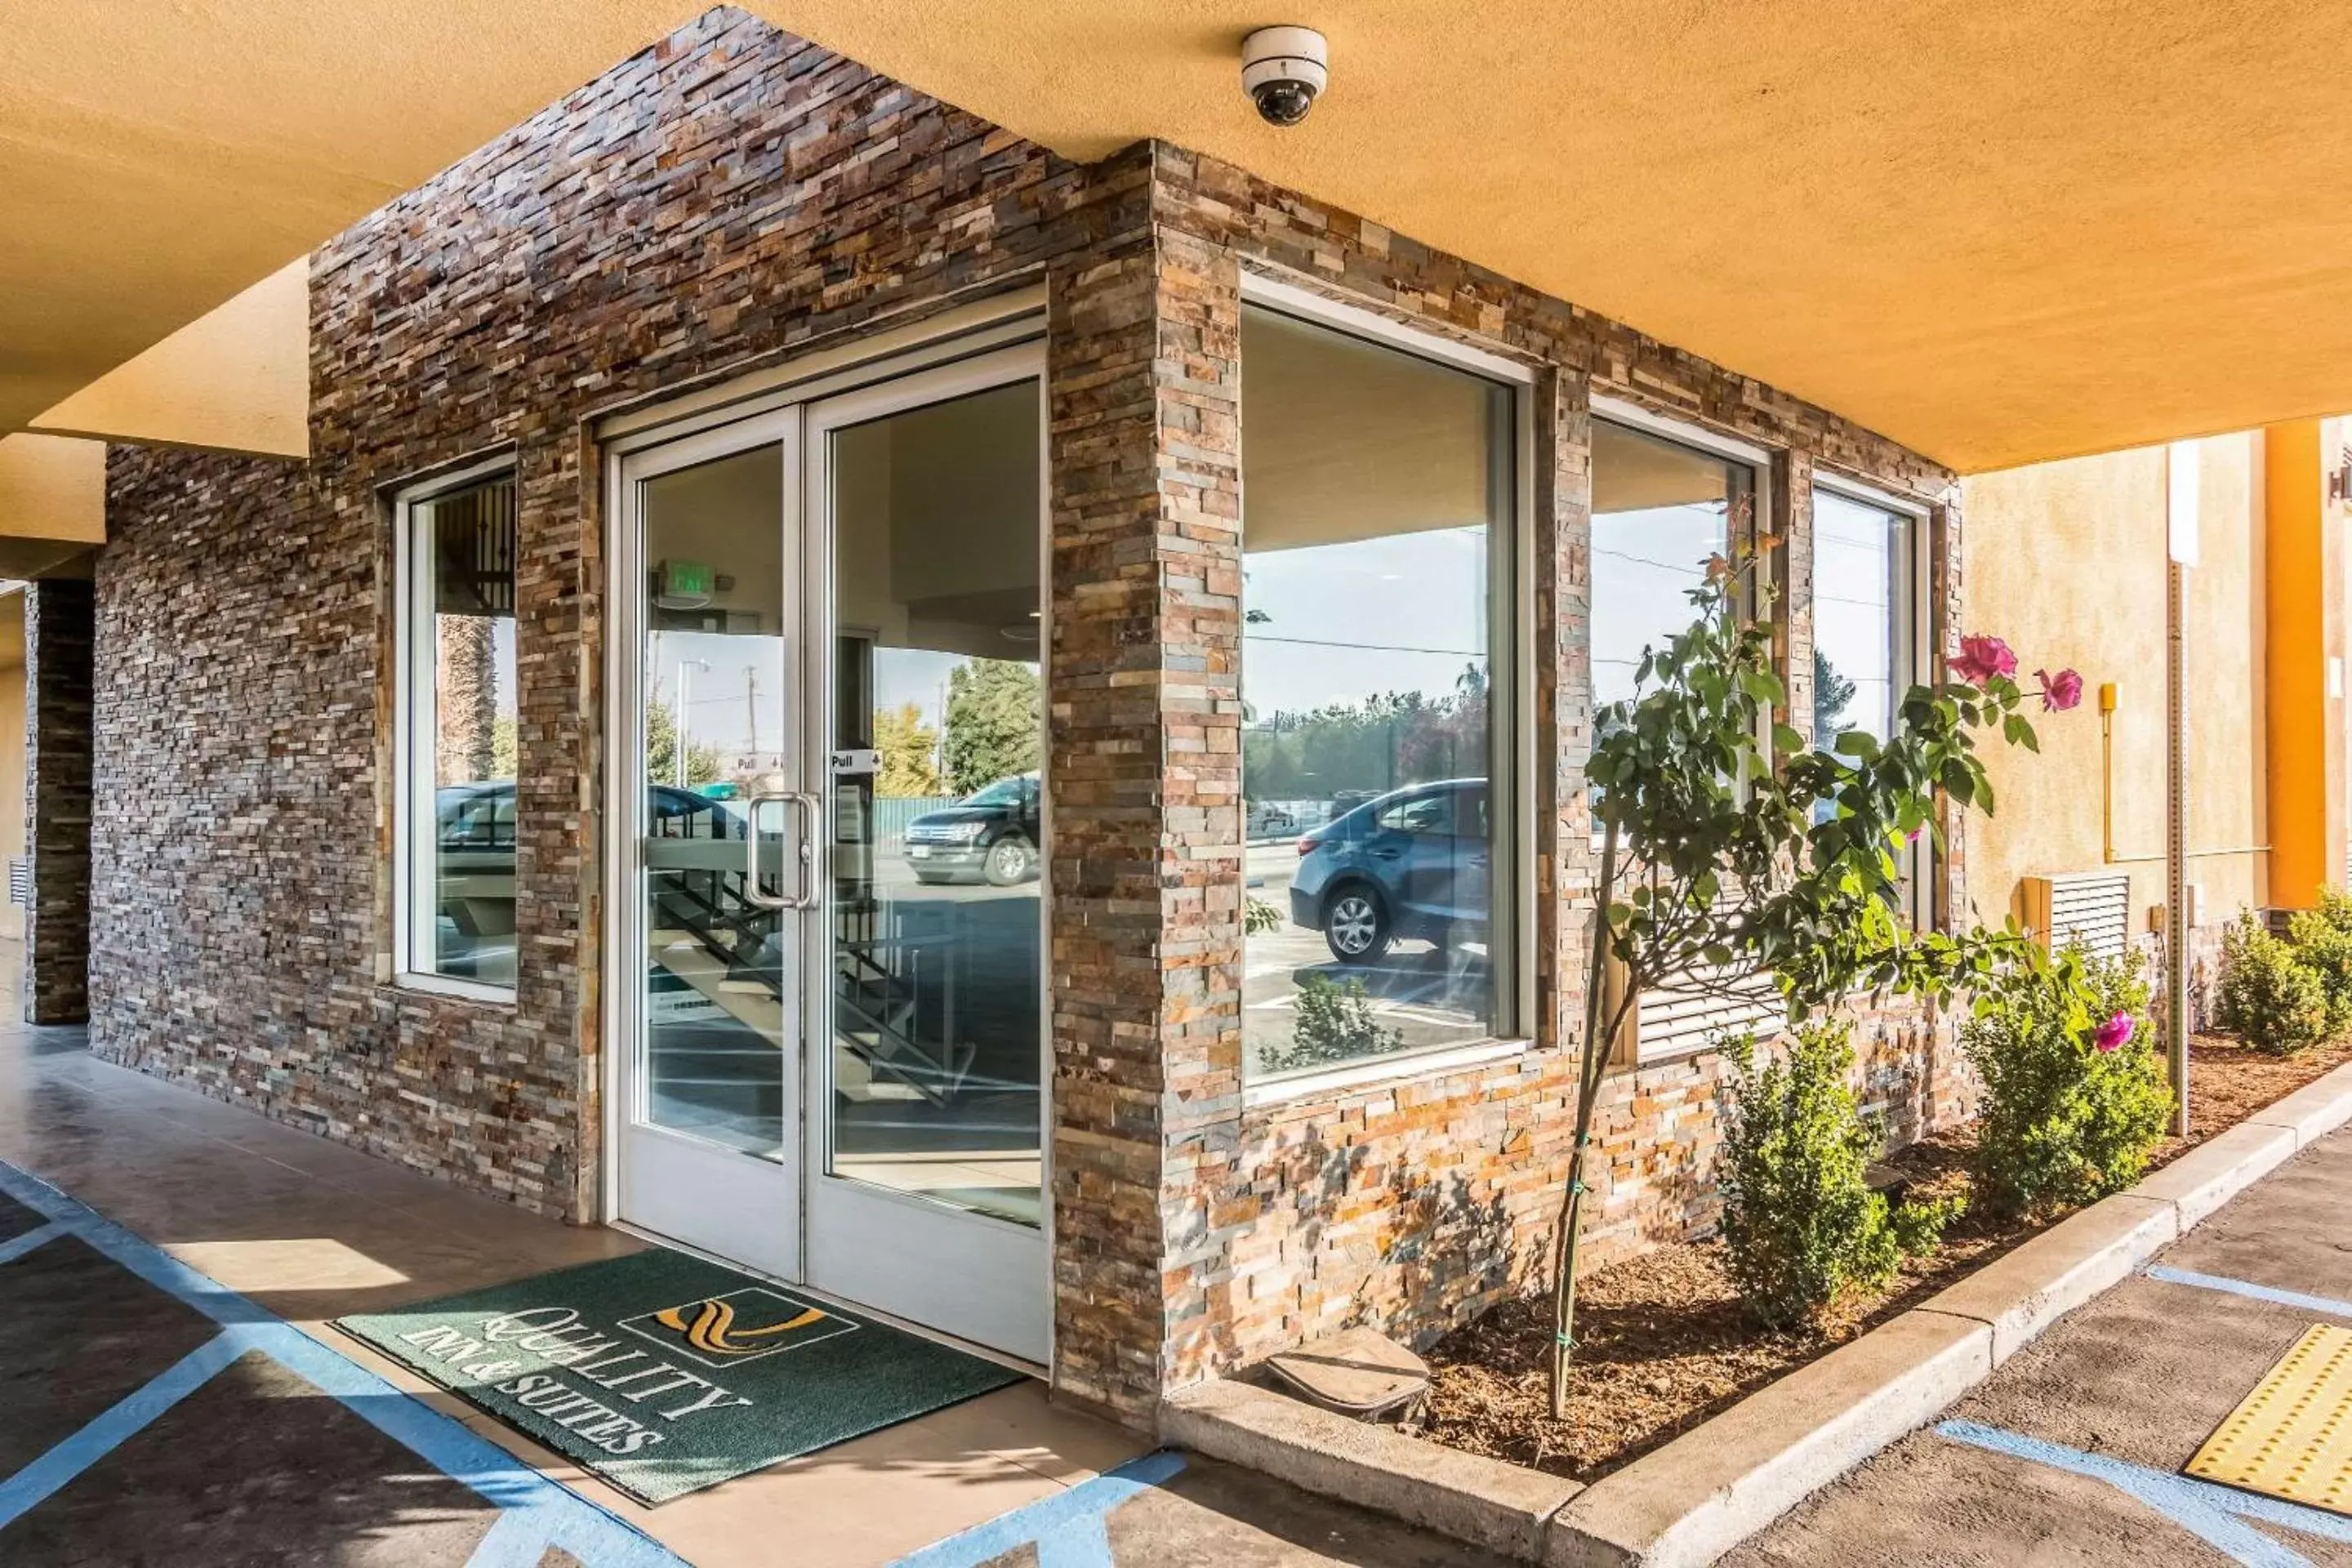 Property building in Quality Inn & Suites near Downtown Bakersfield